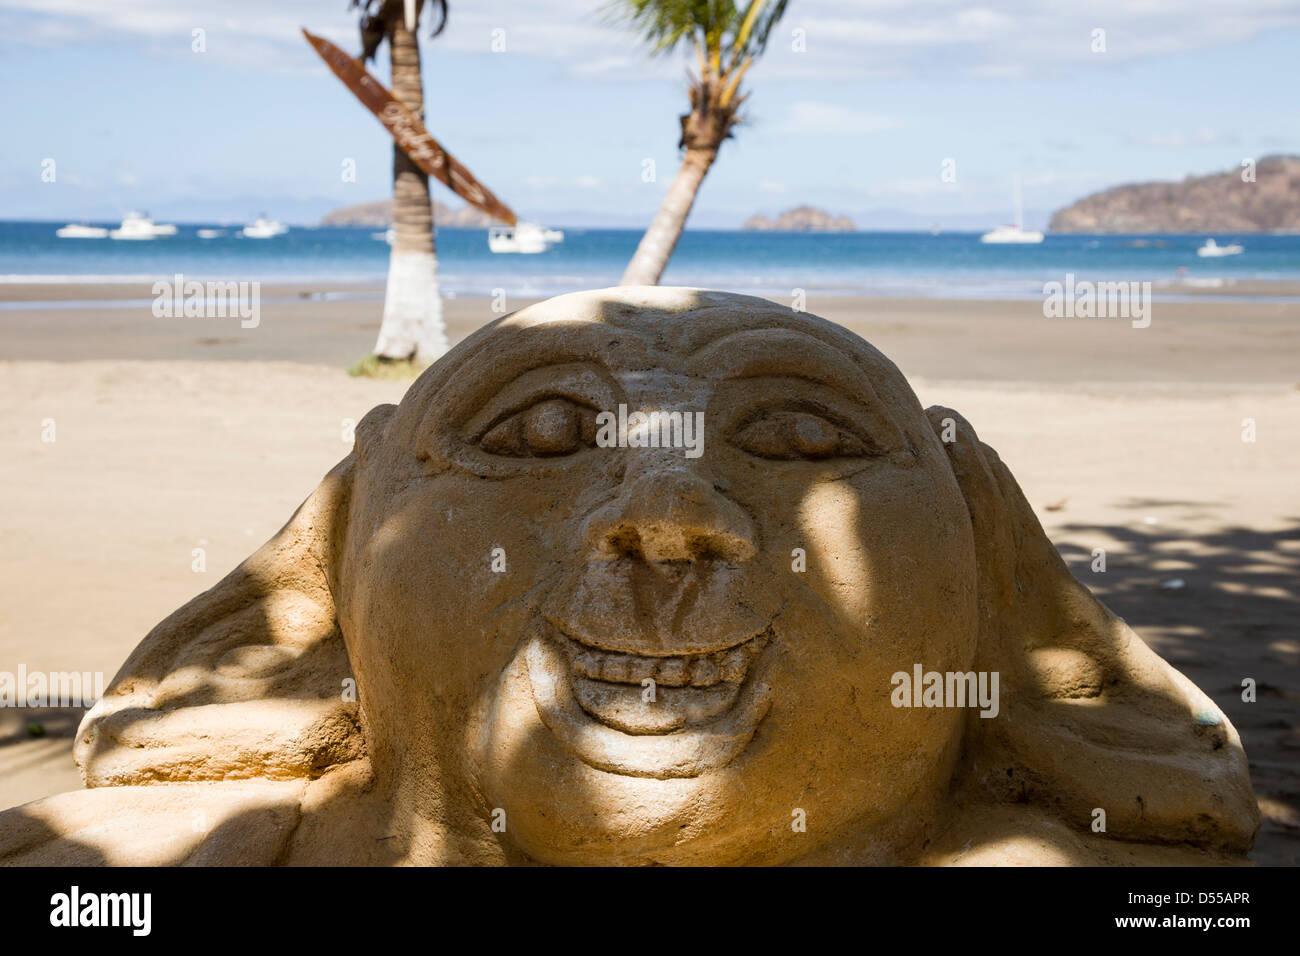 Stone sculpture on the beach at Playas del Coco, Guanacaste Province, Costa Rica. Stock Photo